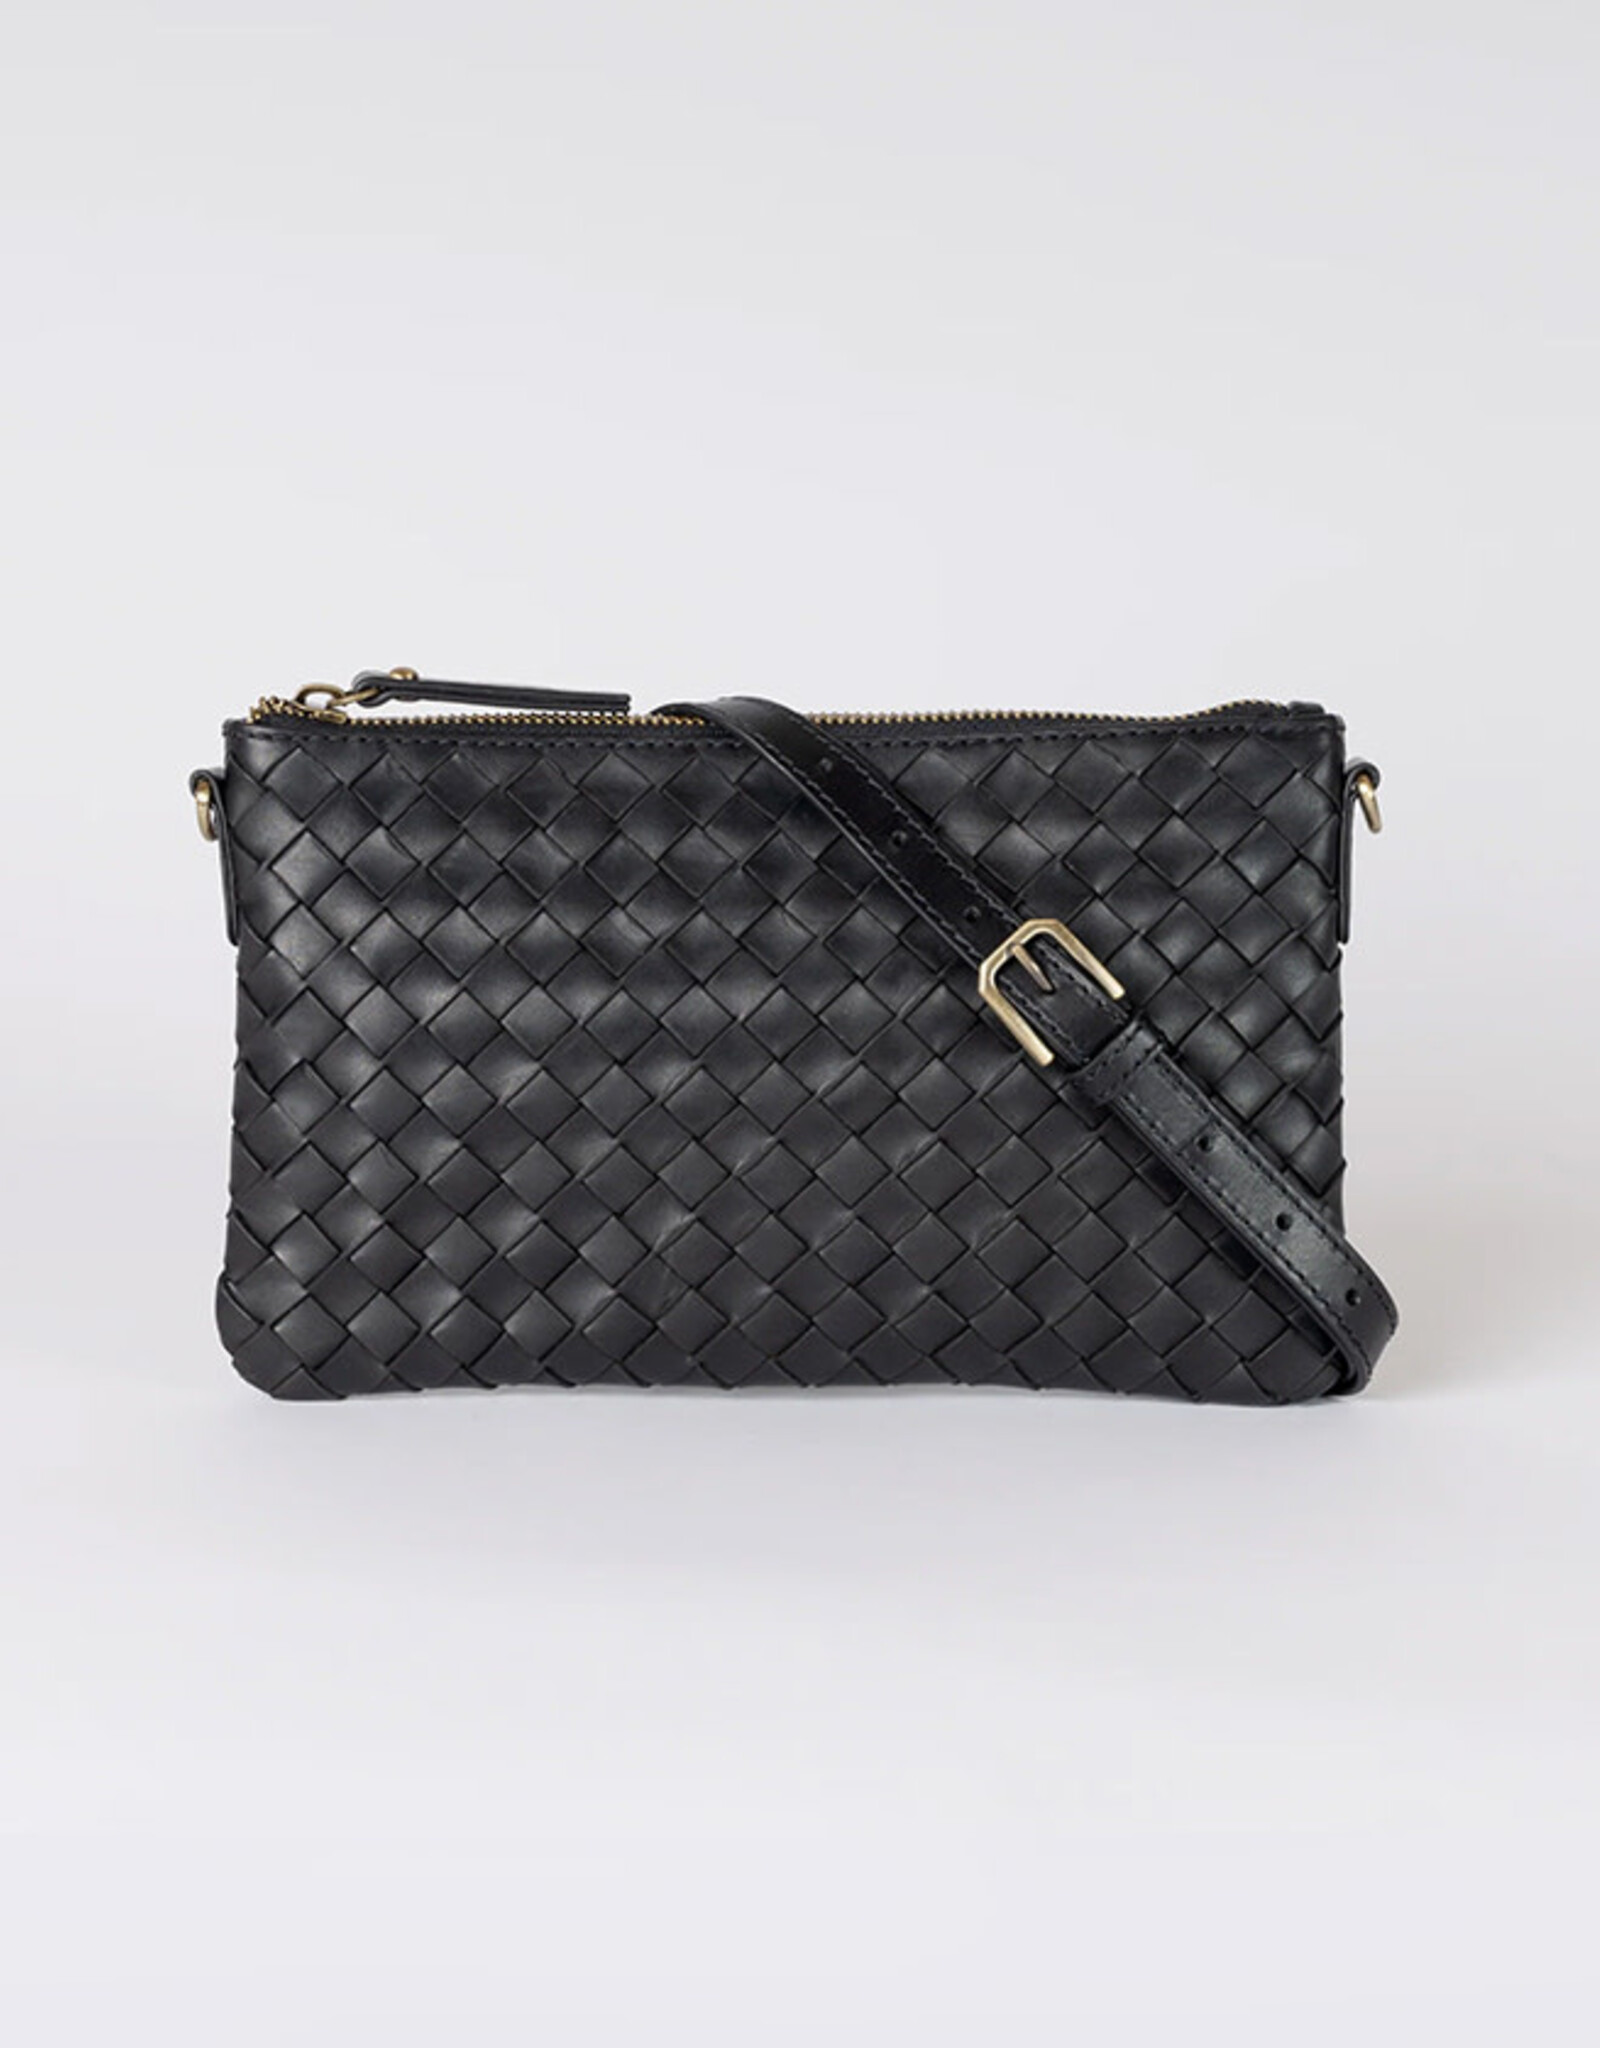 O My Bag Lexi Pouch Woven-black (classic leather)